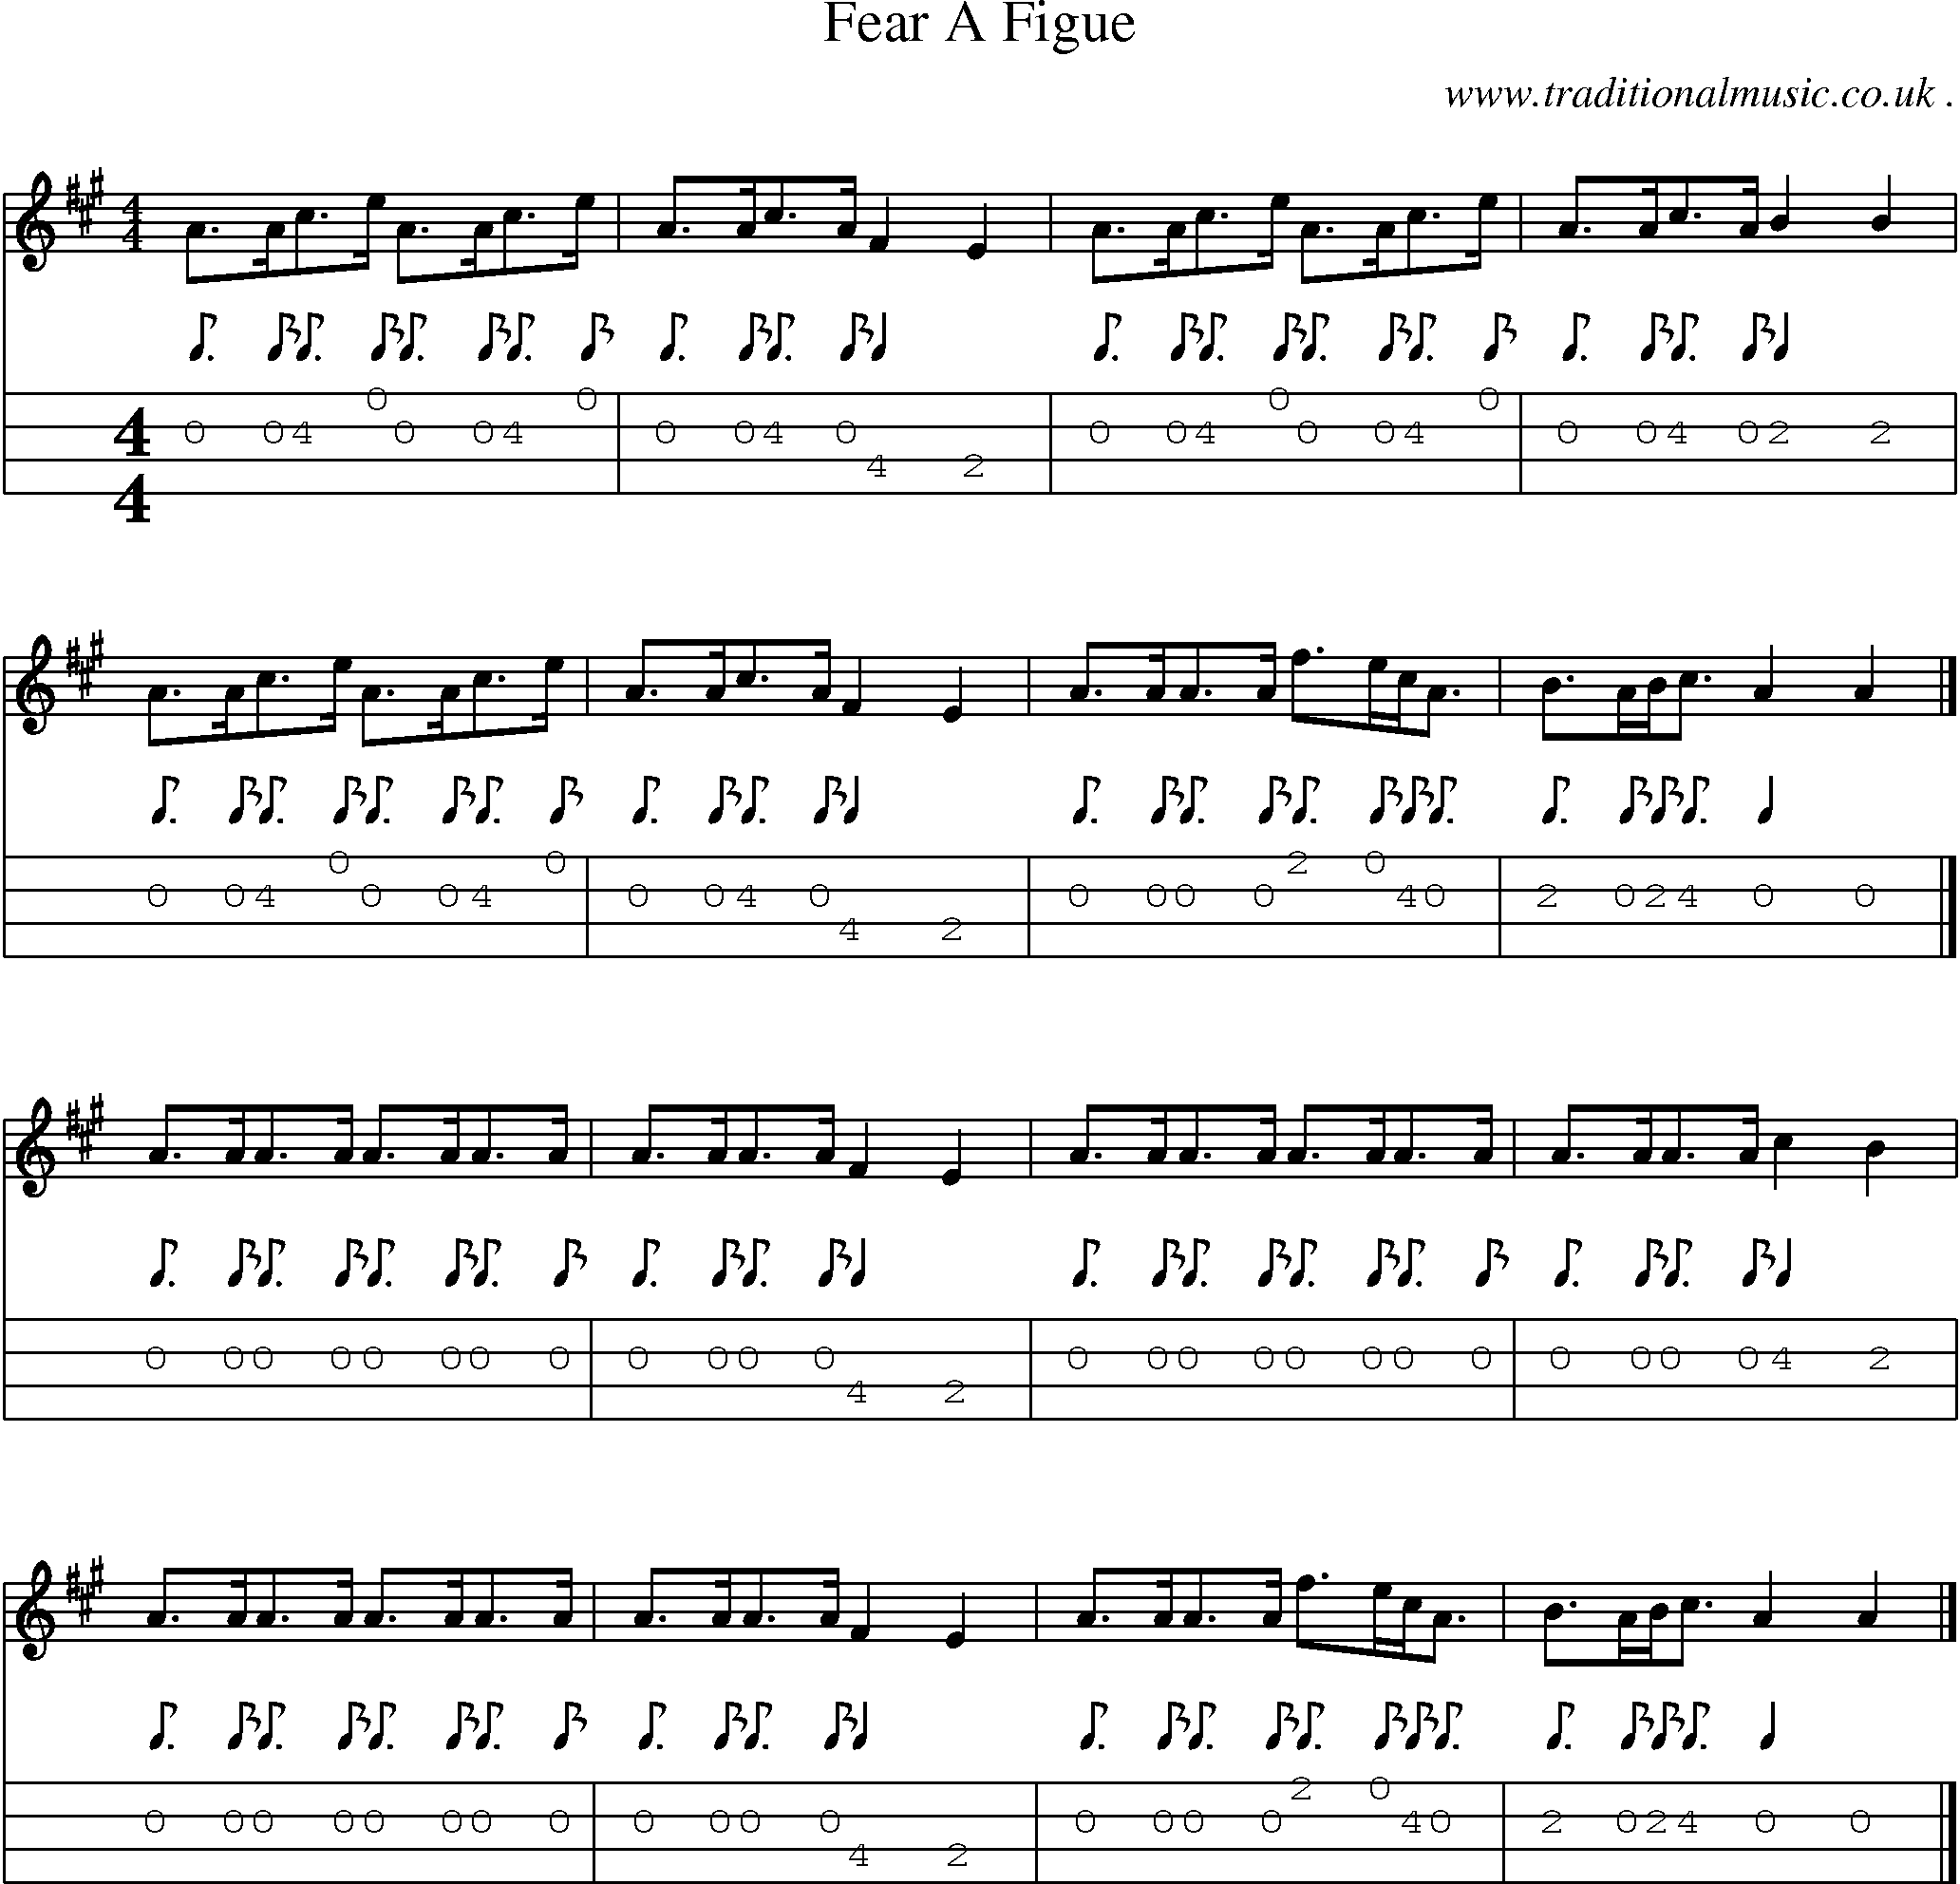 Sheet-music  score, Chords and Mandolin Tabs for Fear A Figue